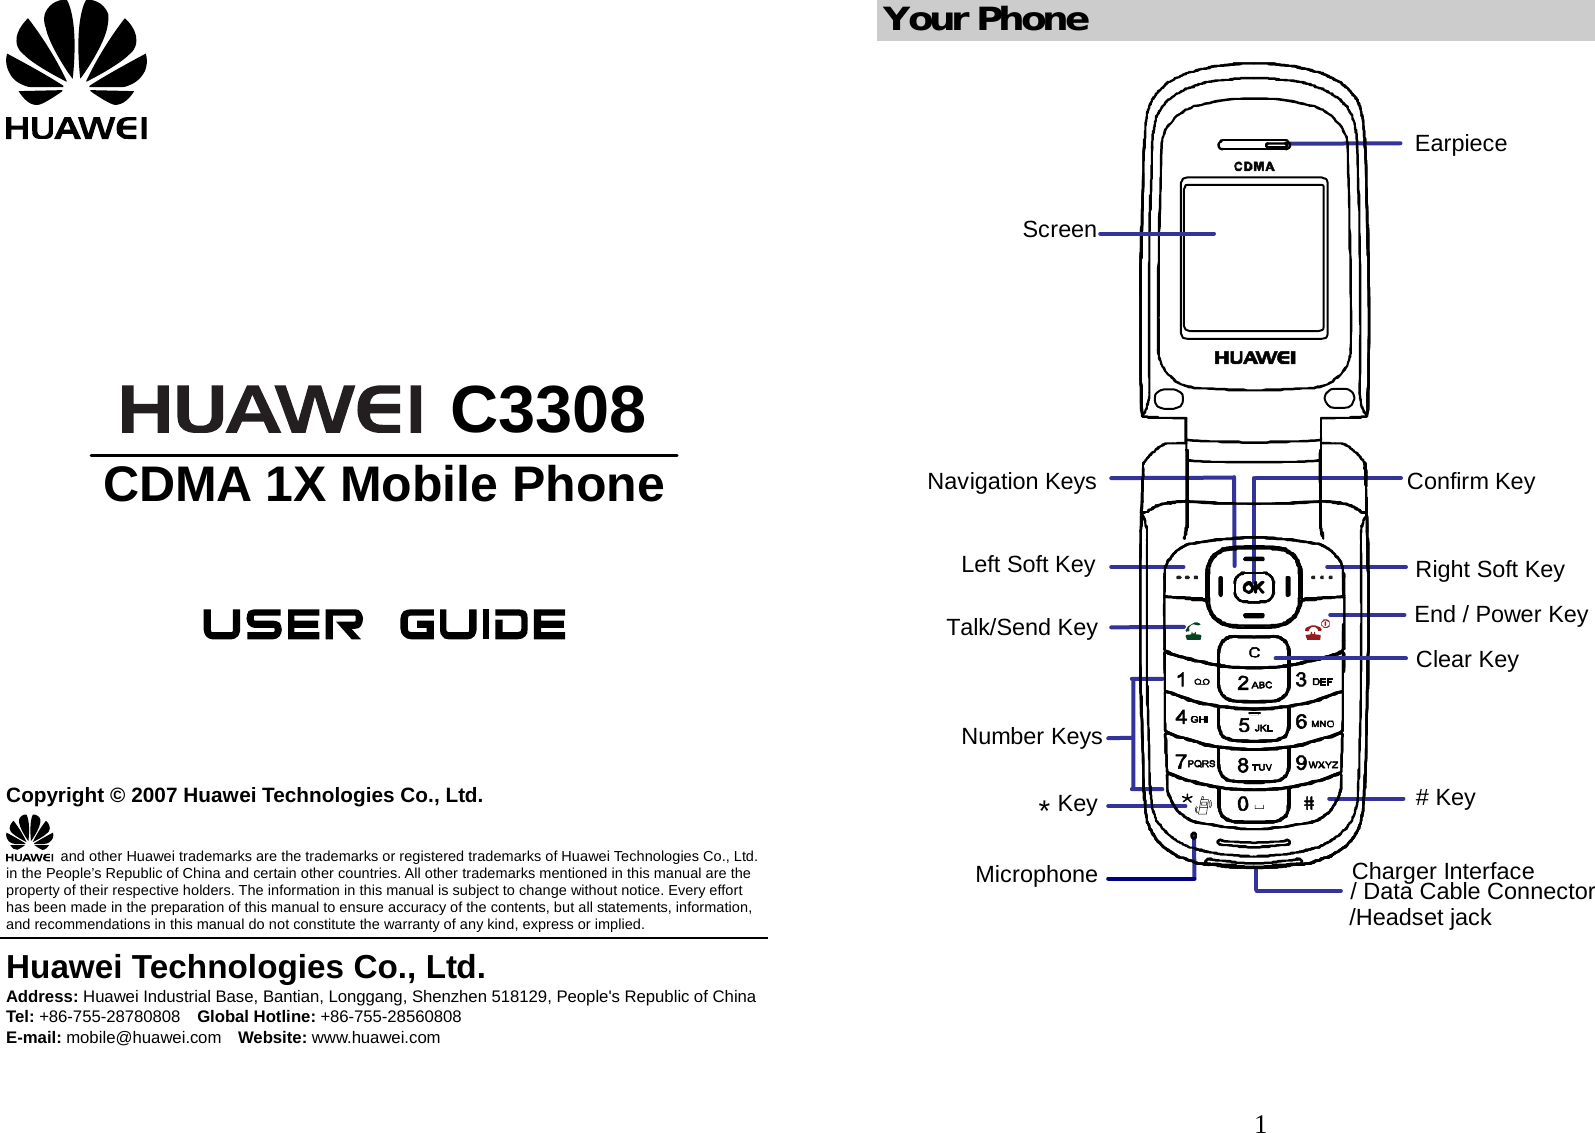         C3308 CDMA 1X Mobile Phone       Copyright © 2007 Huawei Technologies Co., Ltd.   and other Huawei trademarks are the trademarks or registered trademarks of Huawei Technologies Co., Ltd. in the People’s Republic of China and certain other countries. All other trademarks mentioned in this manual are the property of their respective holders. The information in this manual is subject to change without notice. Every effort has been made in the preparation of this manual to ensure accuracy of the contents, but all statements, information, and recommendations in this manual do not constitute the warranty of any kind, express or implied. Huawei Technologies Co., Ltd. Address: Huawei Industrial Base, Bantian, Longgang, Shenzhen 518129, People&apos;s Republic of China Tel: +86-755-28780808  Global Hotline: +86-755-28560808 E-mail: mobile@huawei.com  Website: www.huawei.com   1 Your Phone ScreenEarpieceNavigation KeysLeft Soft KeyTalk/Send KeyRight Soft KeyEnd / Power Key# Key*KeyNumber KeysCharger Interface/ Data Cable ConnectorConfirm KeyMicrophone/Headset jackClear Key    